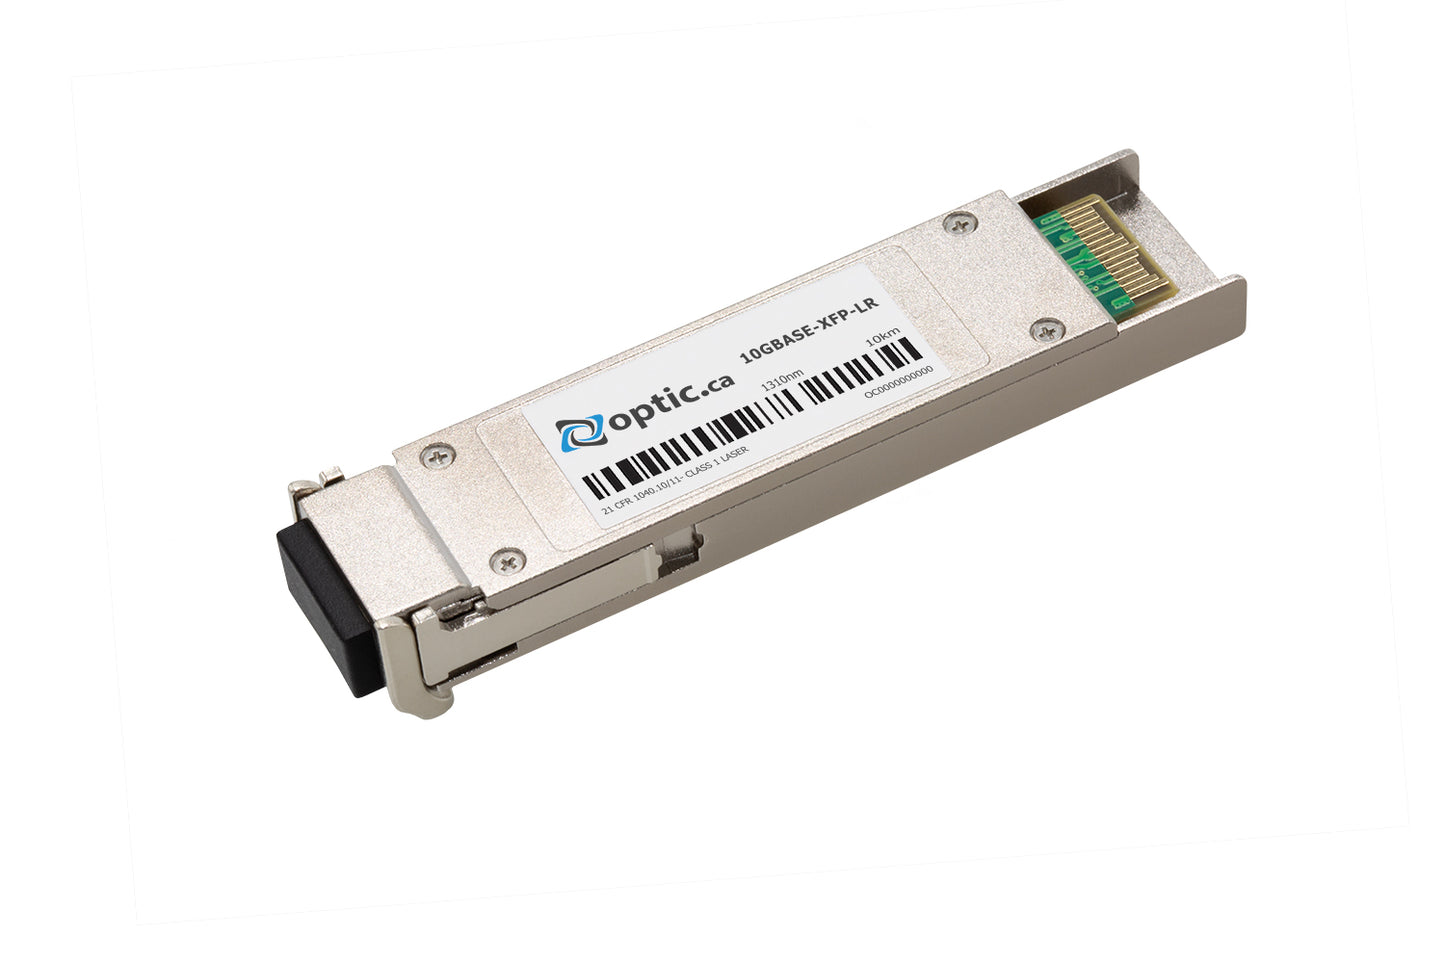 OPTIC.CA - 10GBASE-LR XFP - AT-XPLR-OC - ALLIED TELESIS COMPATIBLE